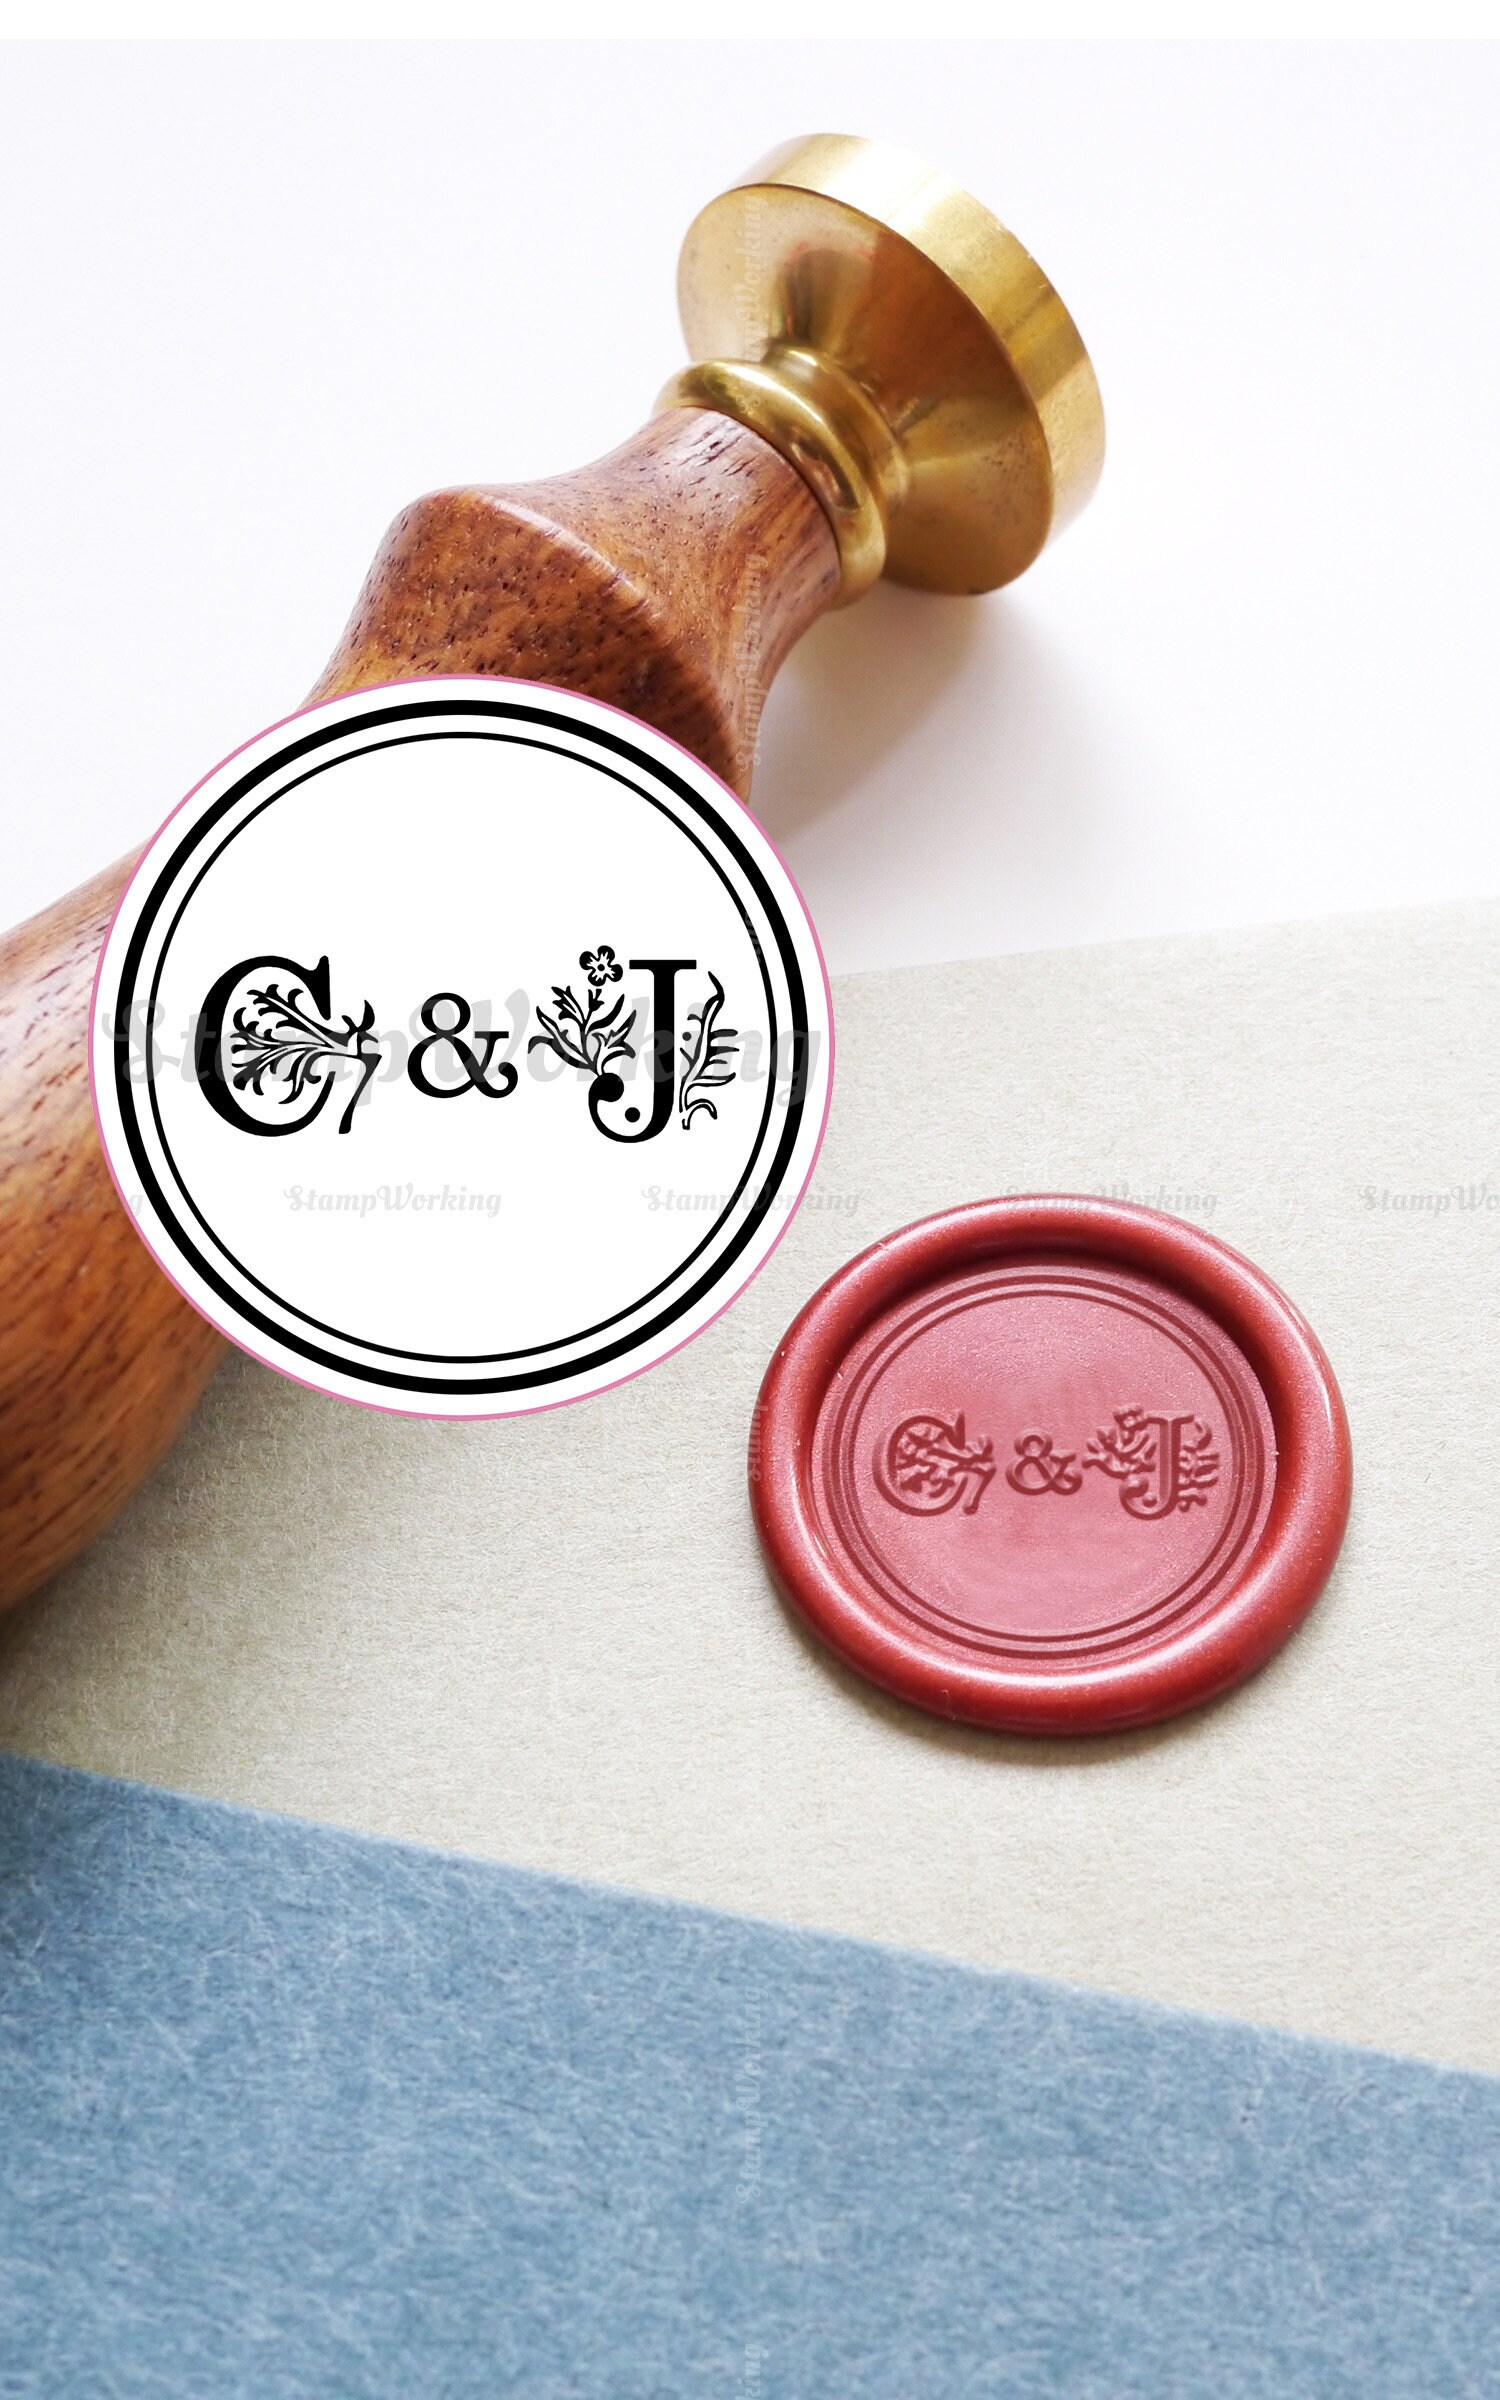 Letters Sealing Wax Seal Stamp Set, Wax Stamps Kit Letters